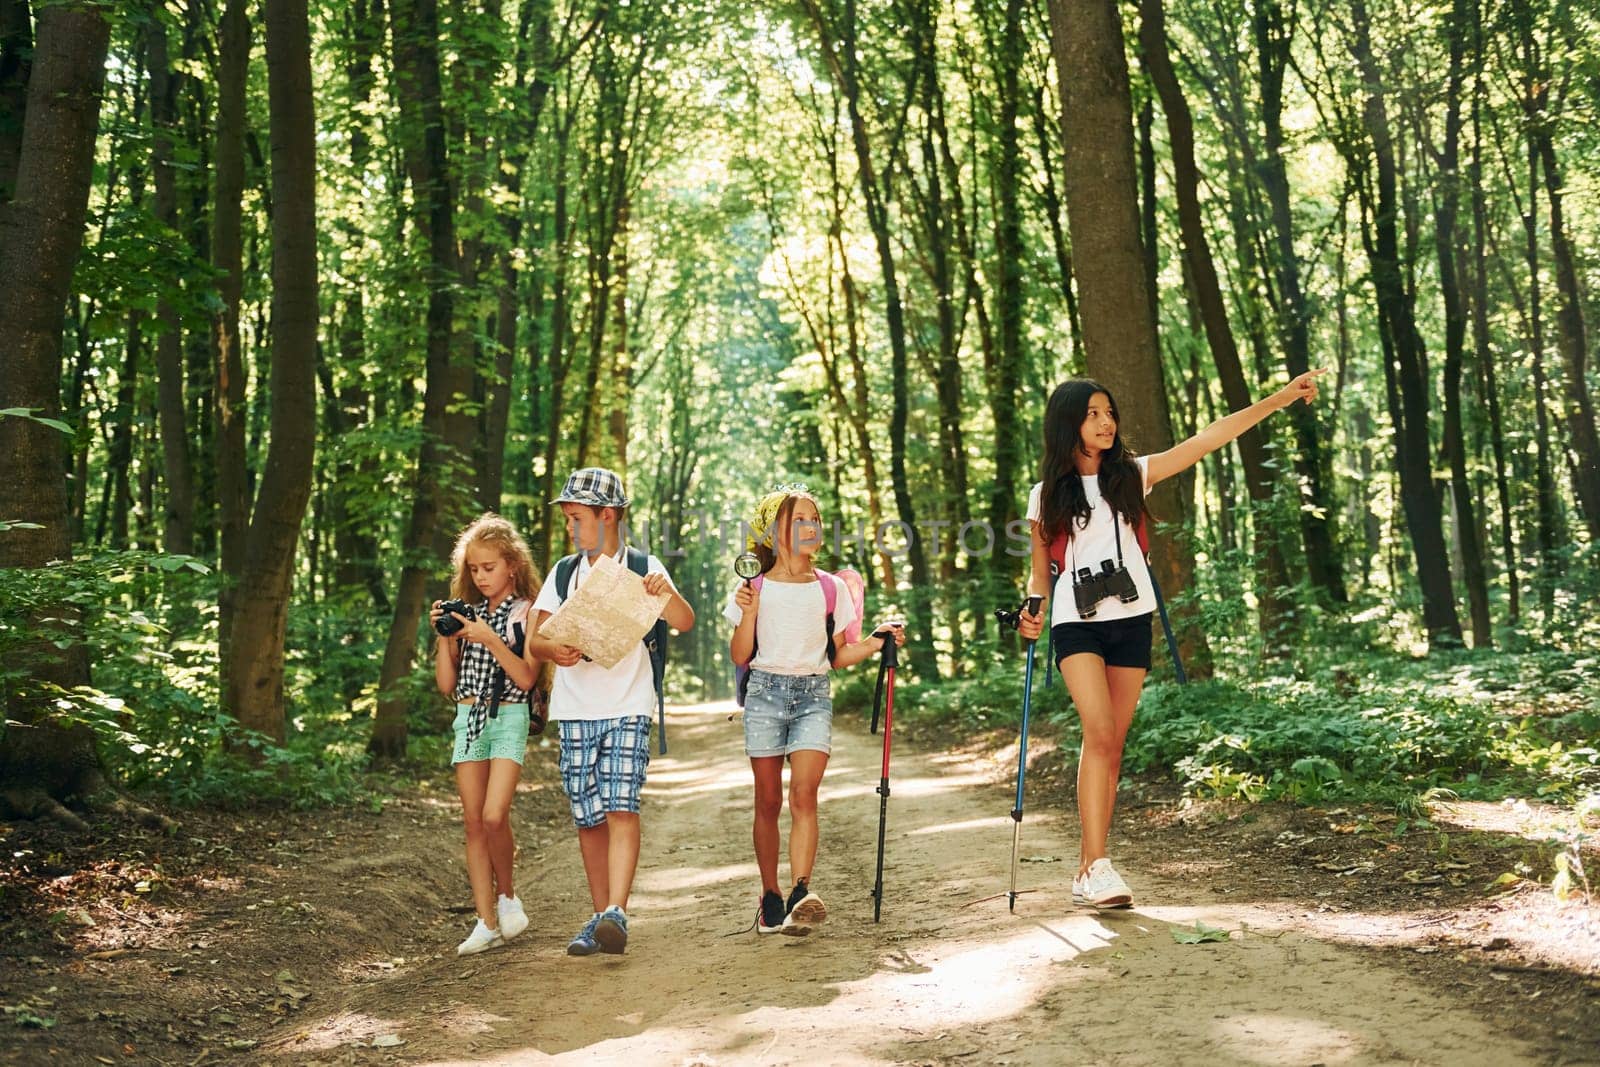 With map. Kids strolling in the forest with travel equipment.